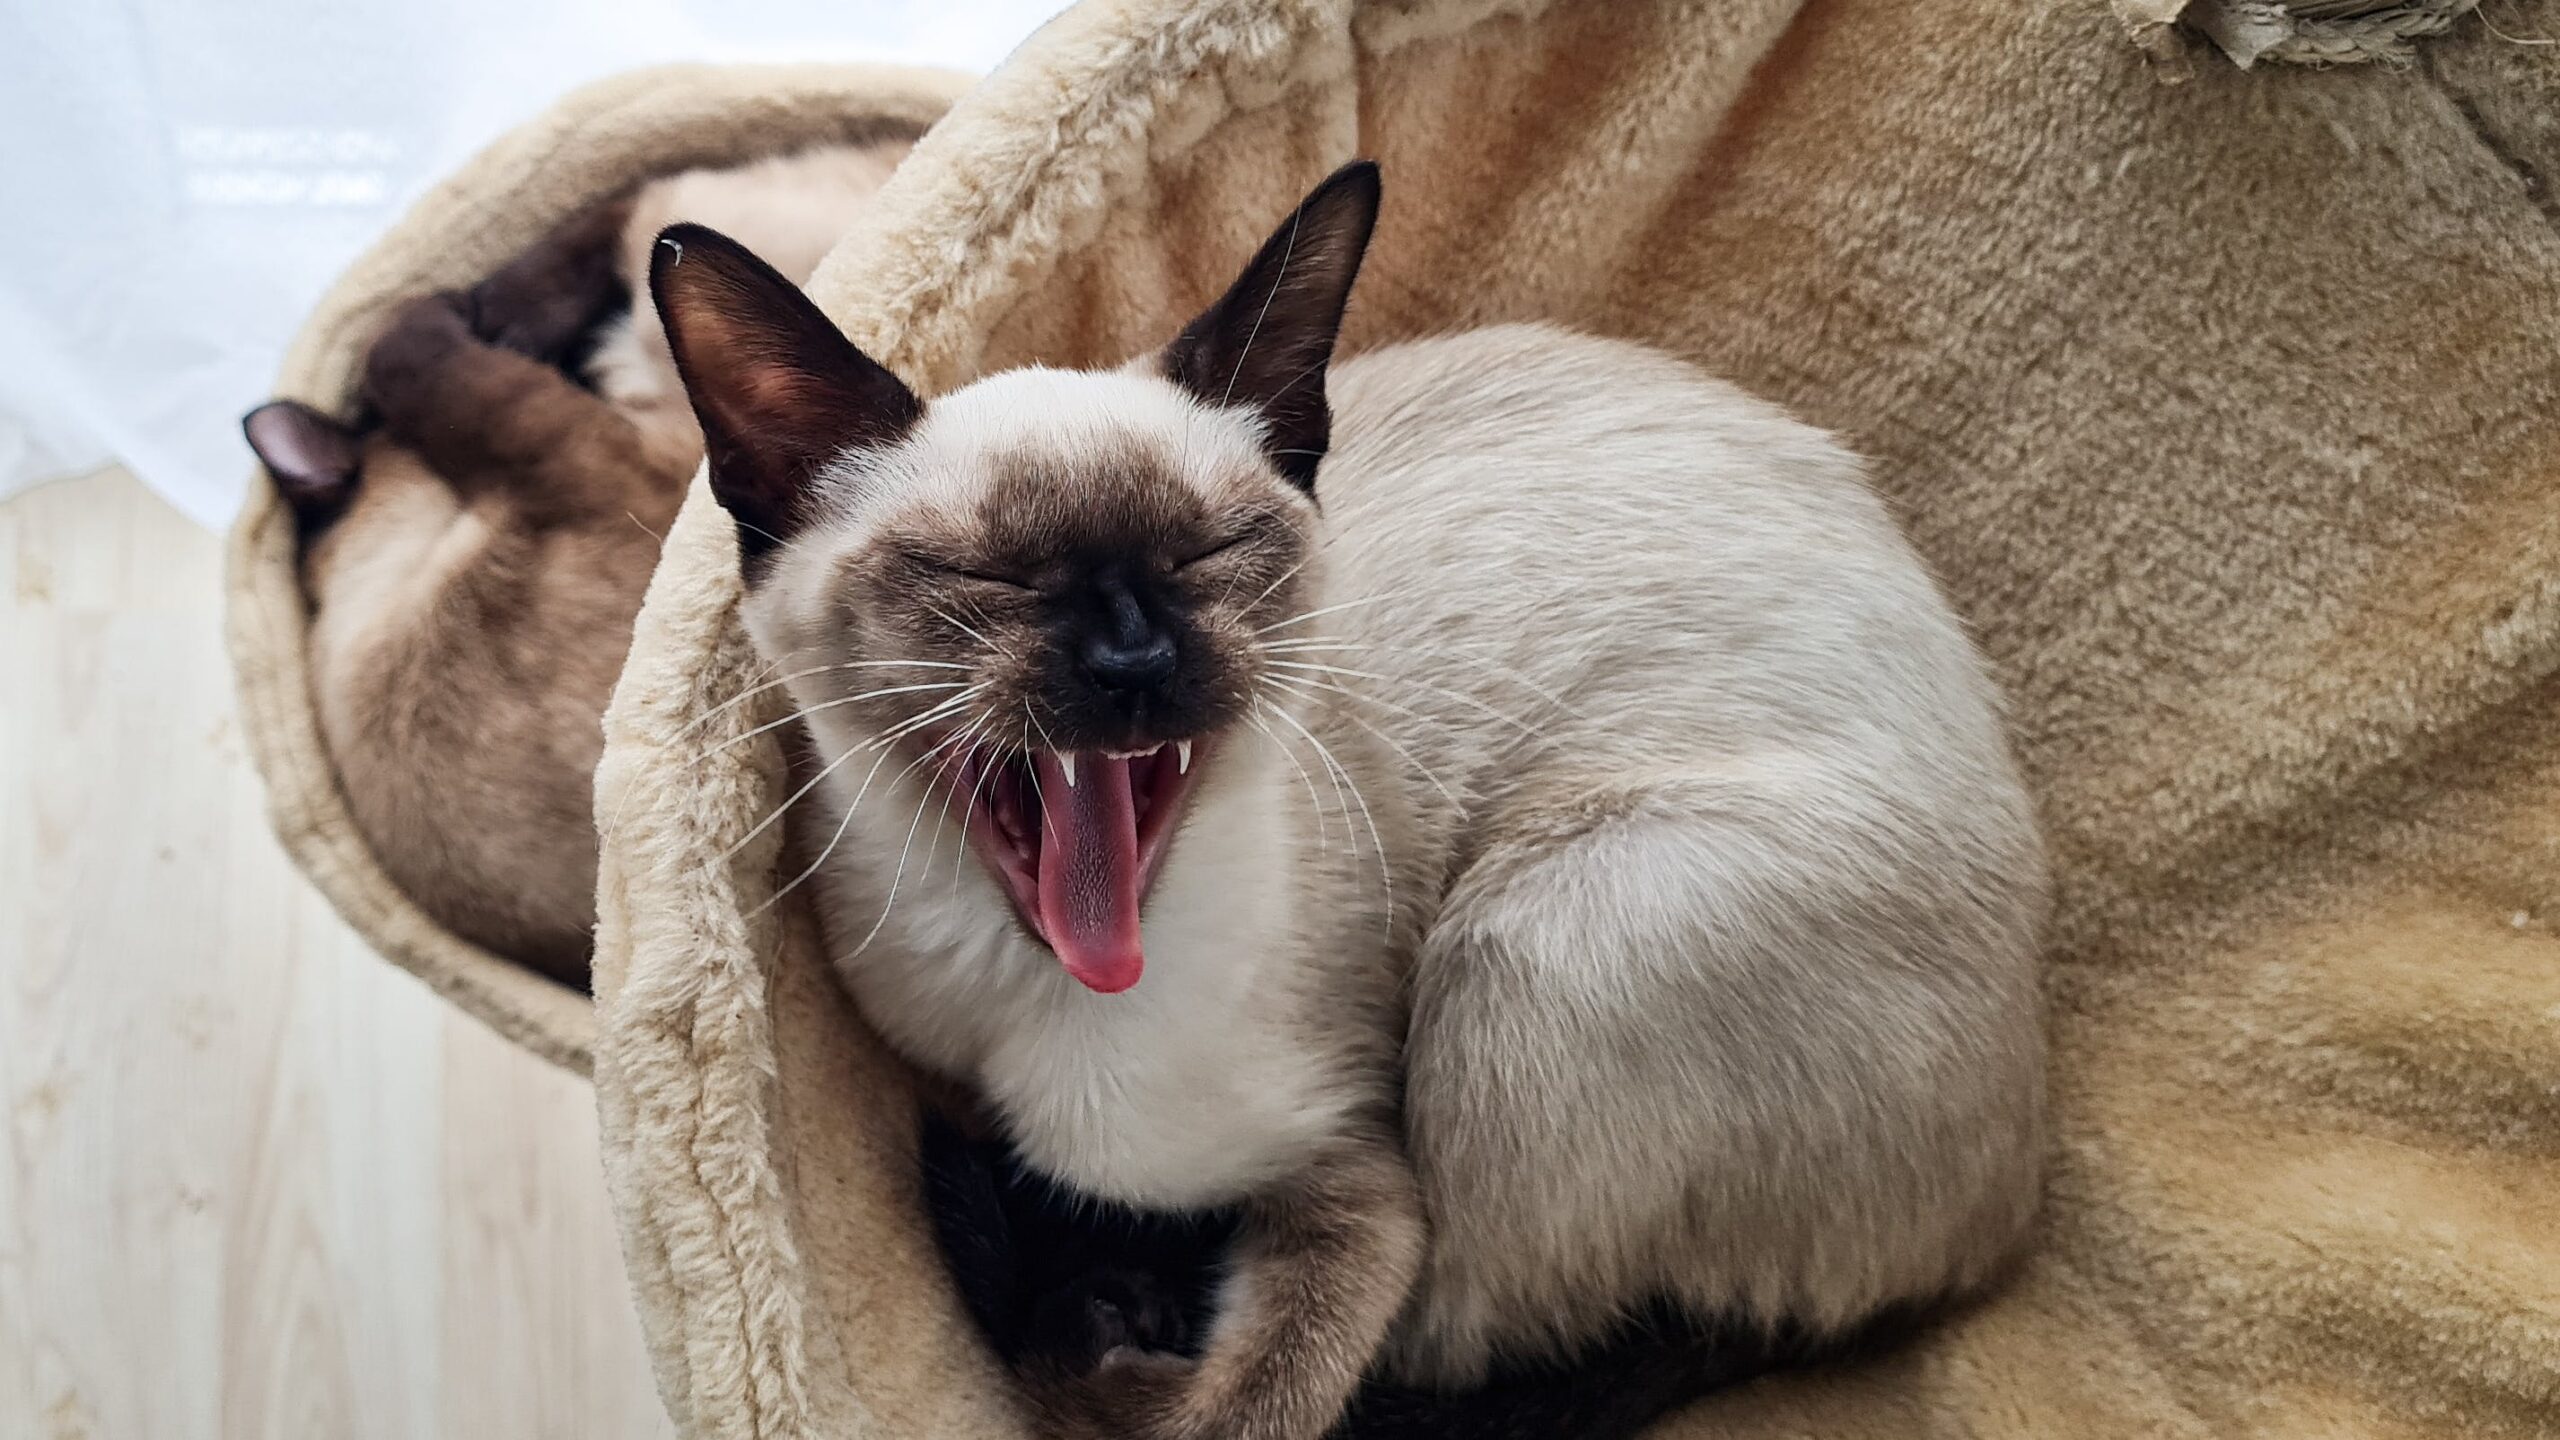 An image of a cat showing signs of aggression, with raised fur, arched back, and hissing, displaying typical aggressive behavior.